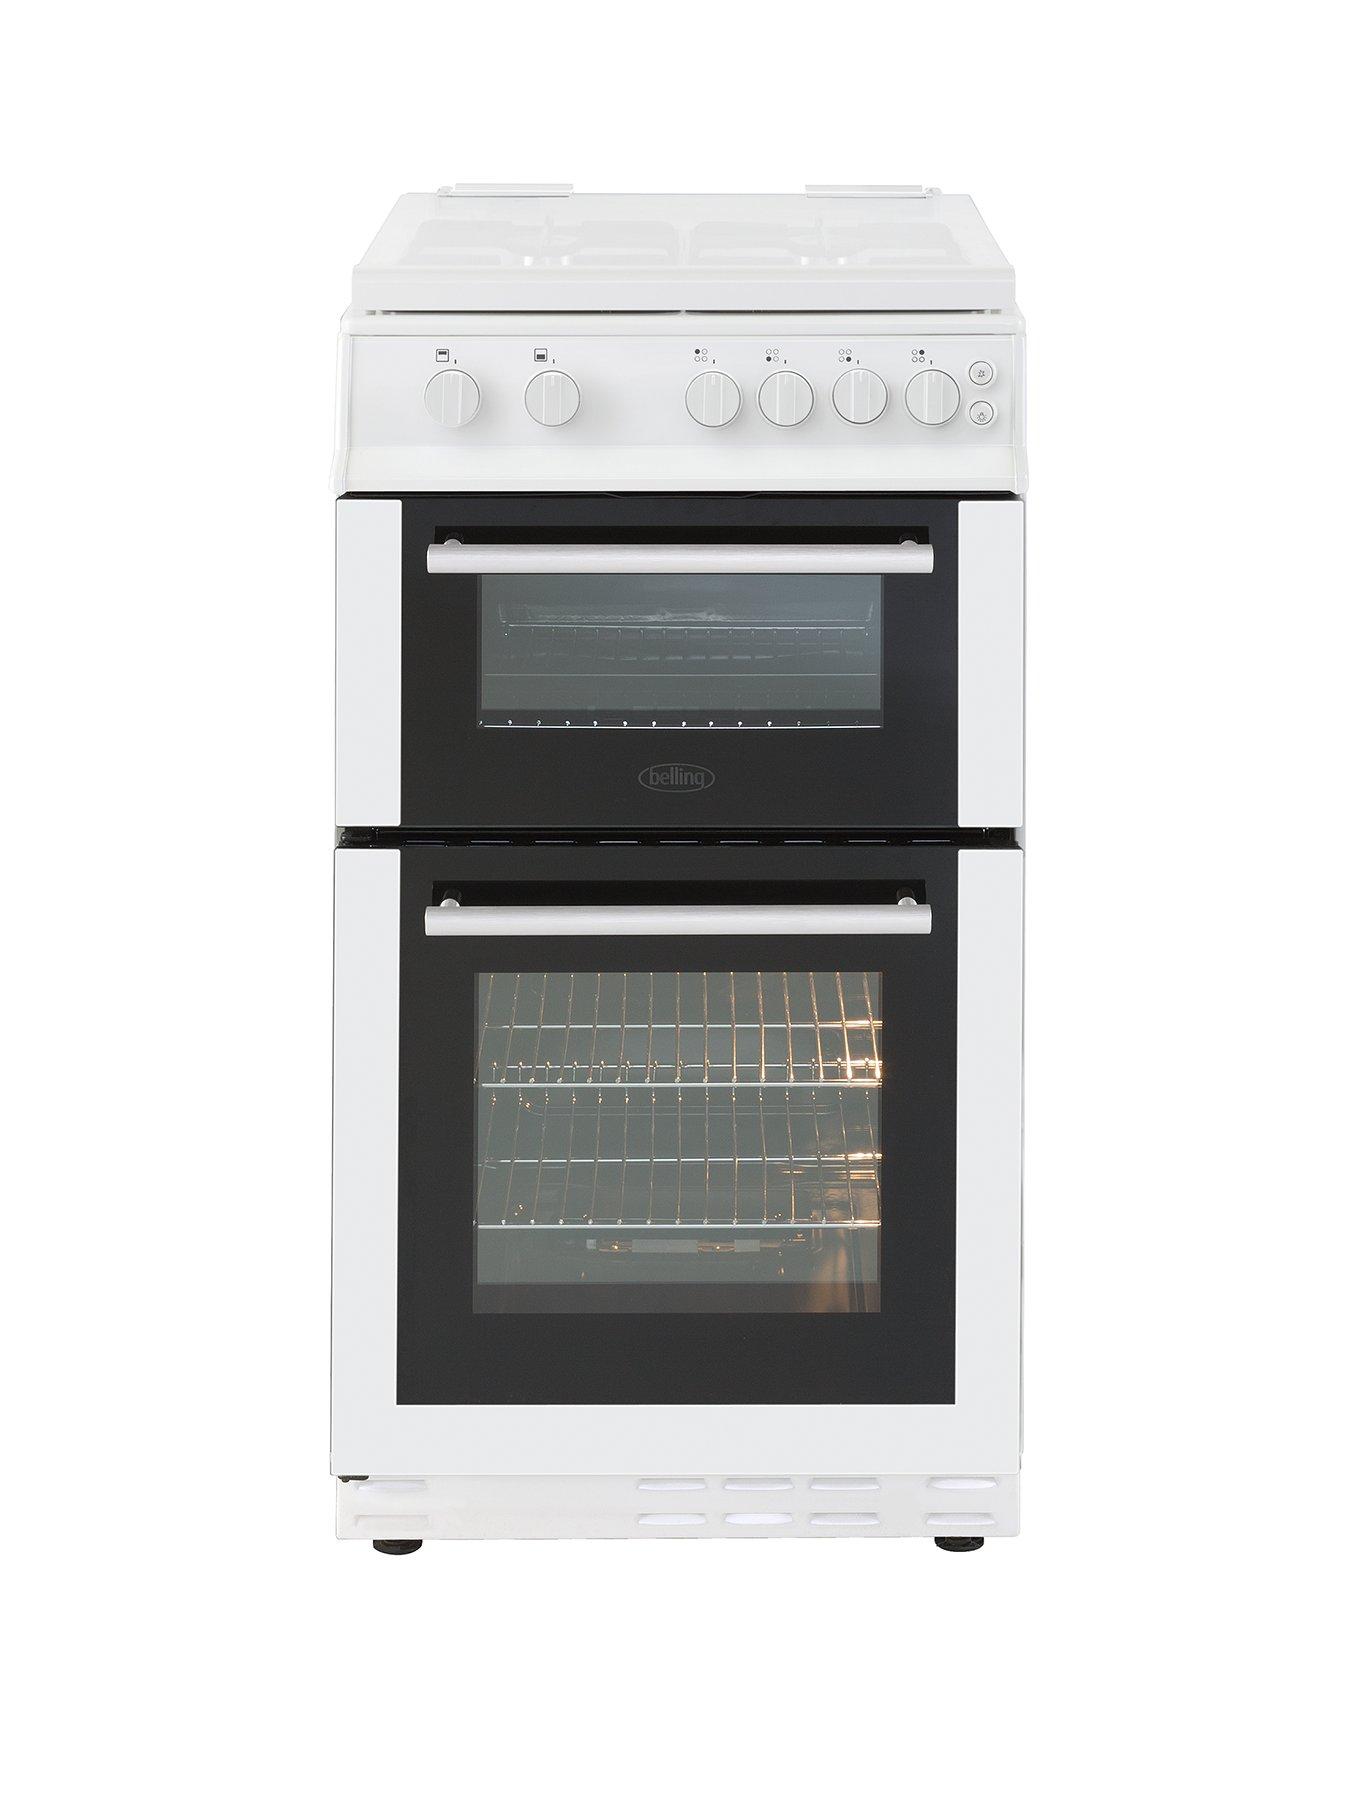 Belling Bel Fs50Gdol 50Cm Gas Double Oven With Connection – White